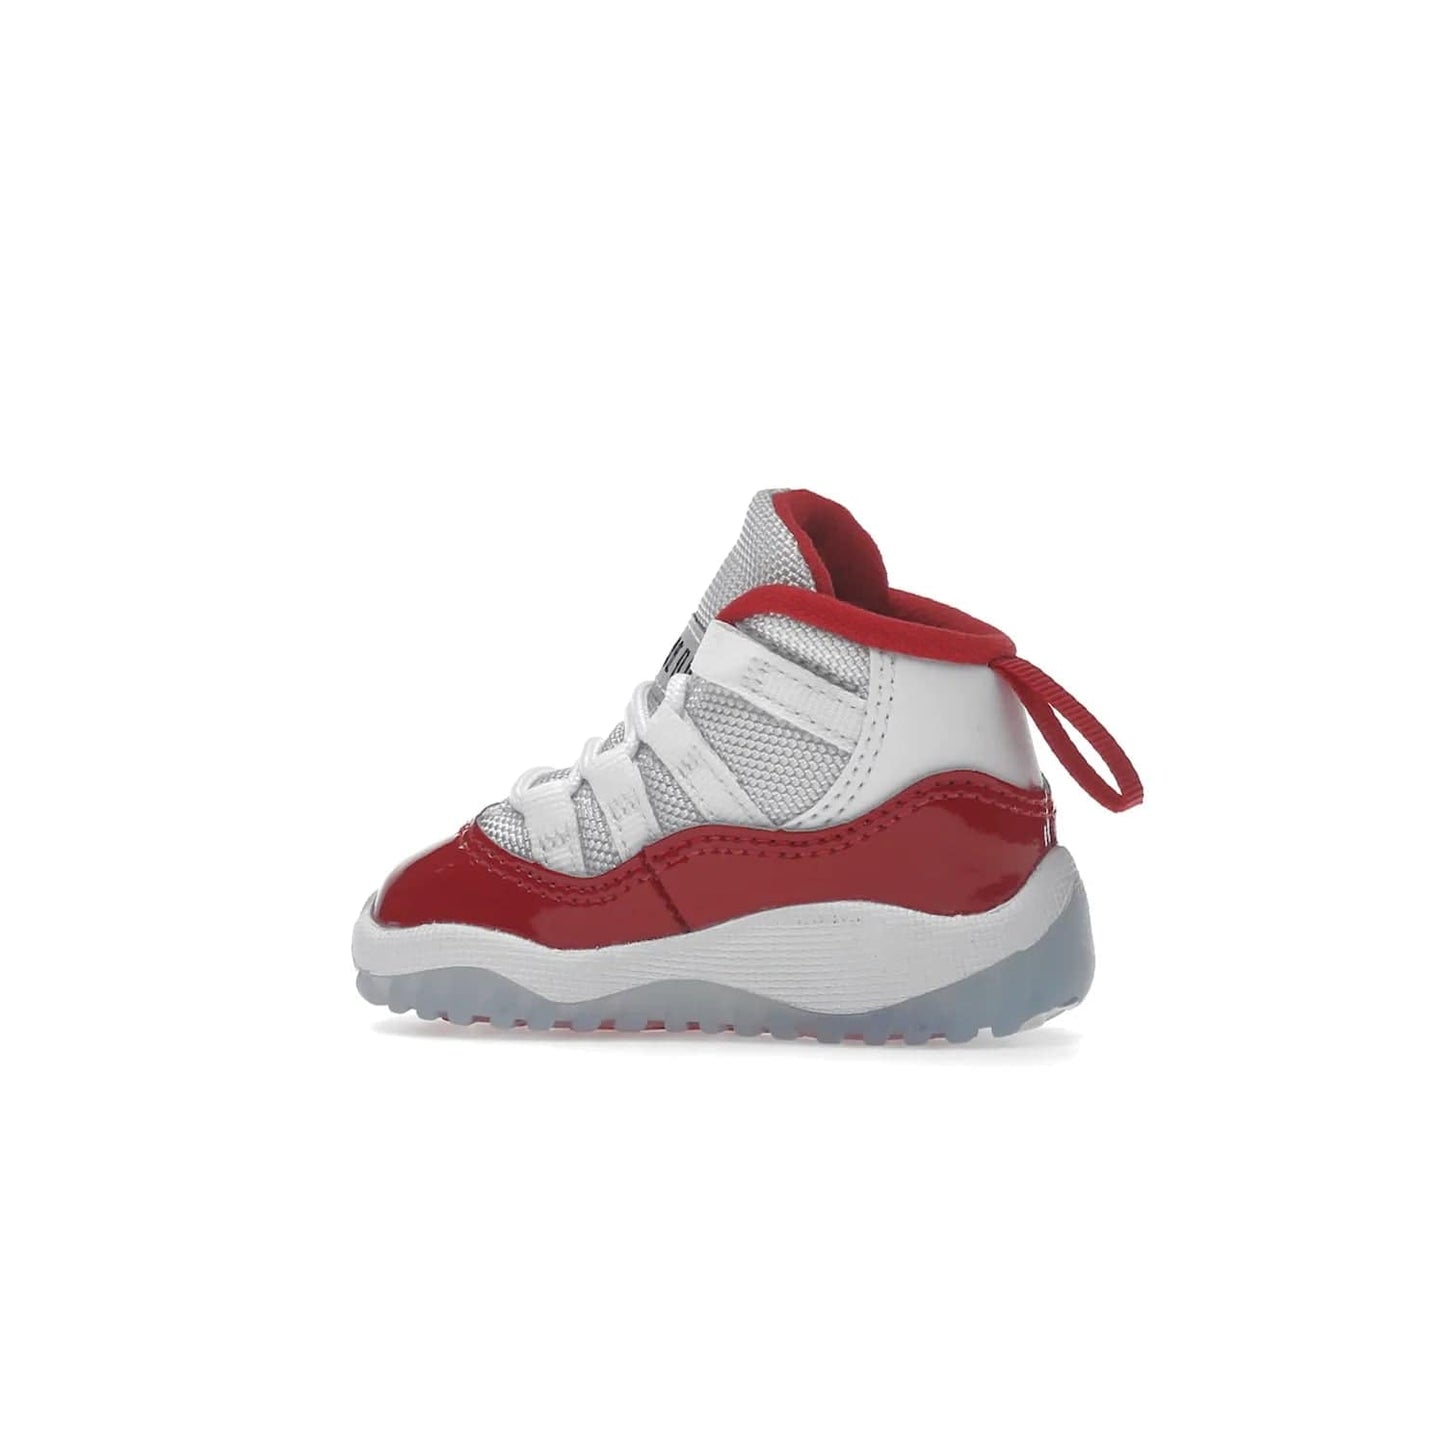 Jordan 11 Retro Cherry (2022) (TD) - Image 21 - Only at www.BallersClubKickz.com - Timeless classic. Air Jordan 11 Retro Cherry 2022 TD combines mesh, leather & suede for a unique look. White upper with varsity red suede. Jumpman logo on collar & tongue. Available Dec 10th, priced at $80.